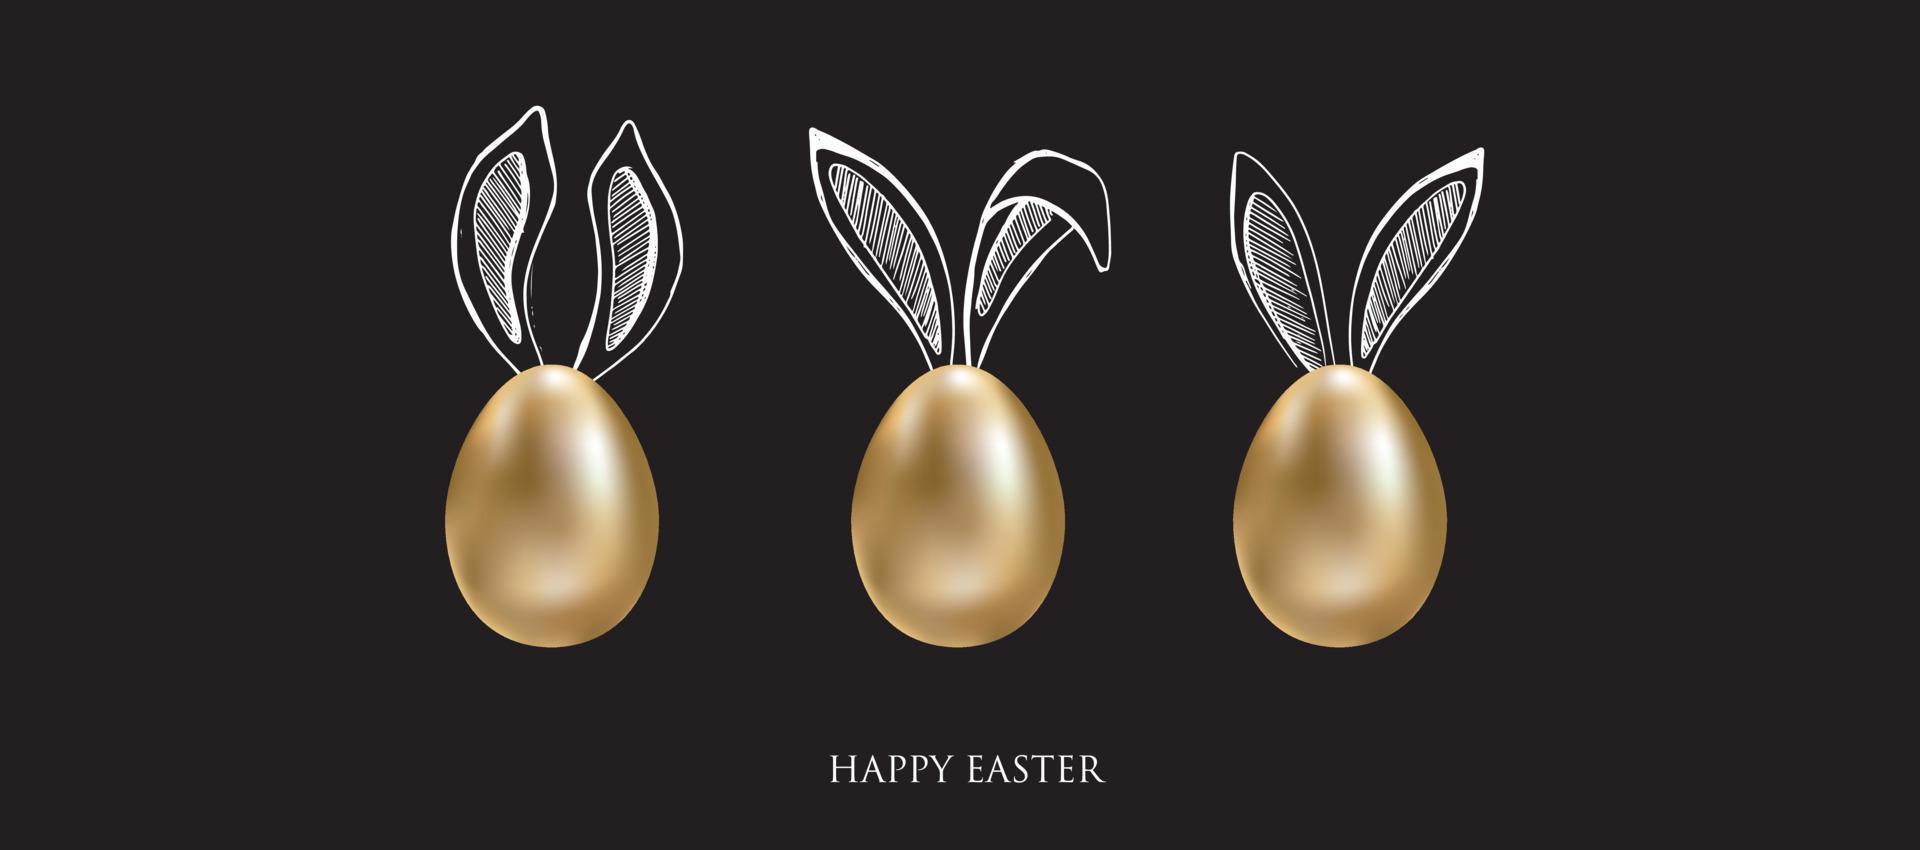 Happy Easter. Set of rabbits's ears. Gold eggs. Hand drawn illustration. vector